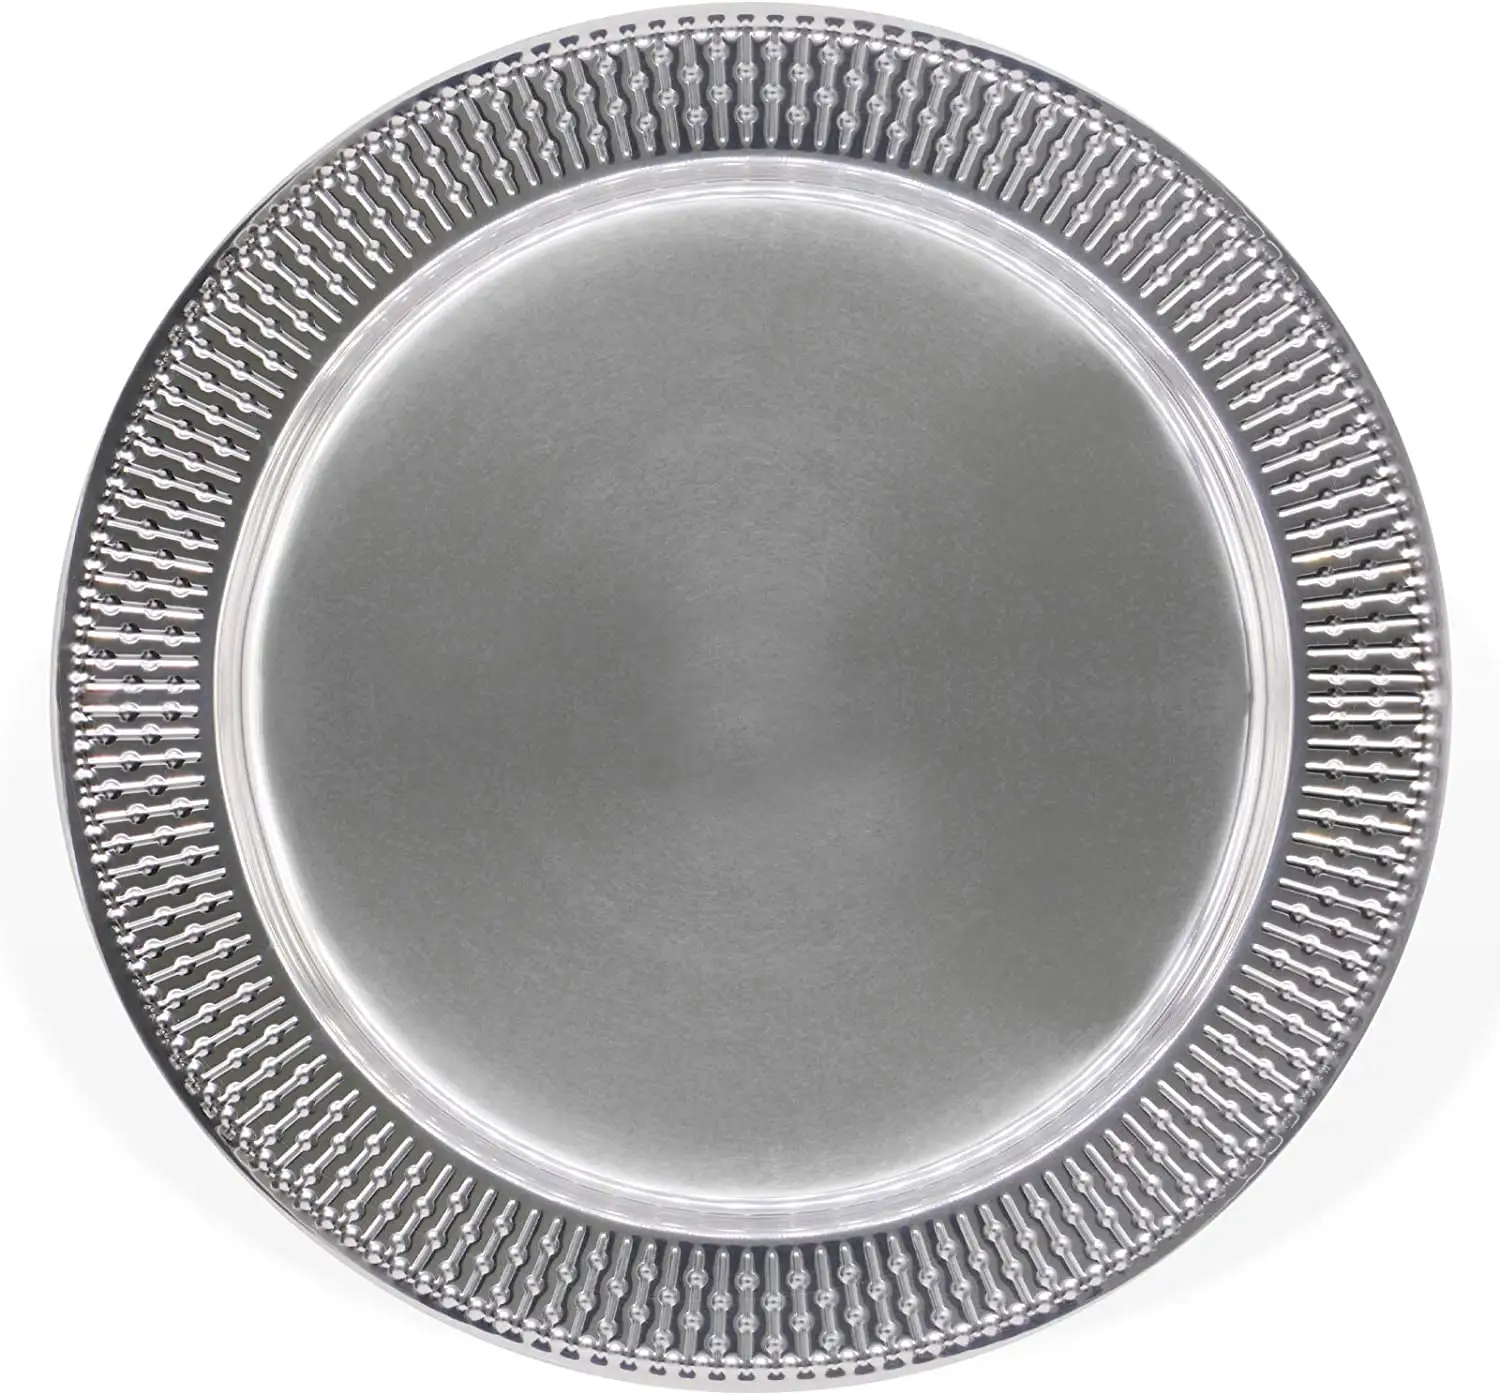 13 Inch Plastic Charger Plates Dinnerware Service Plate for Party Dinner Wedding, Beaded Edge, Shiny Foil Design (Silver)